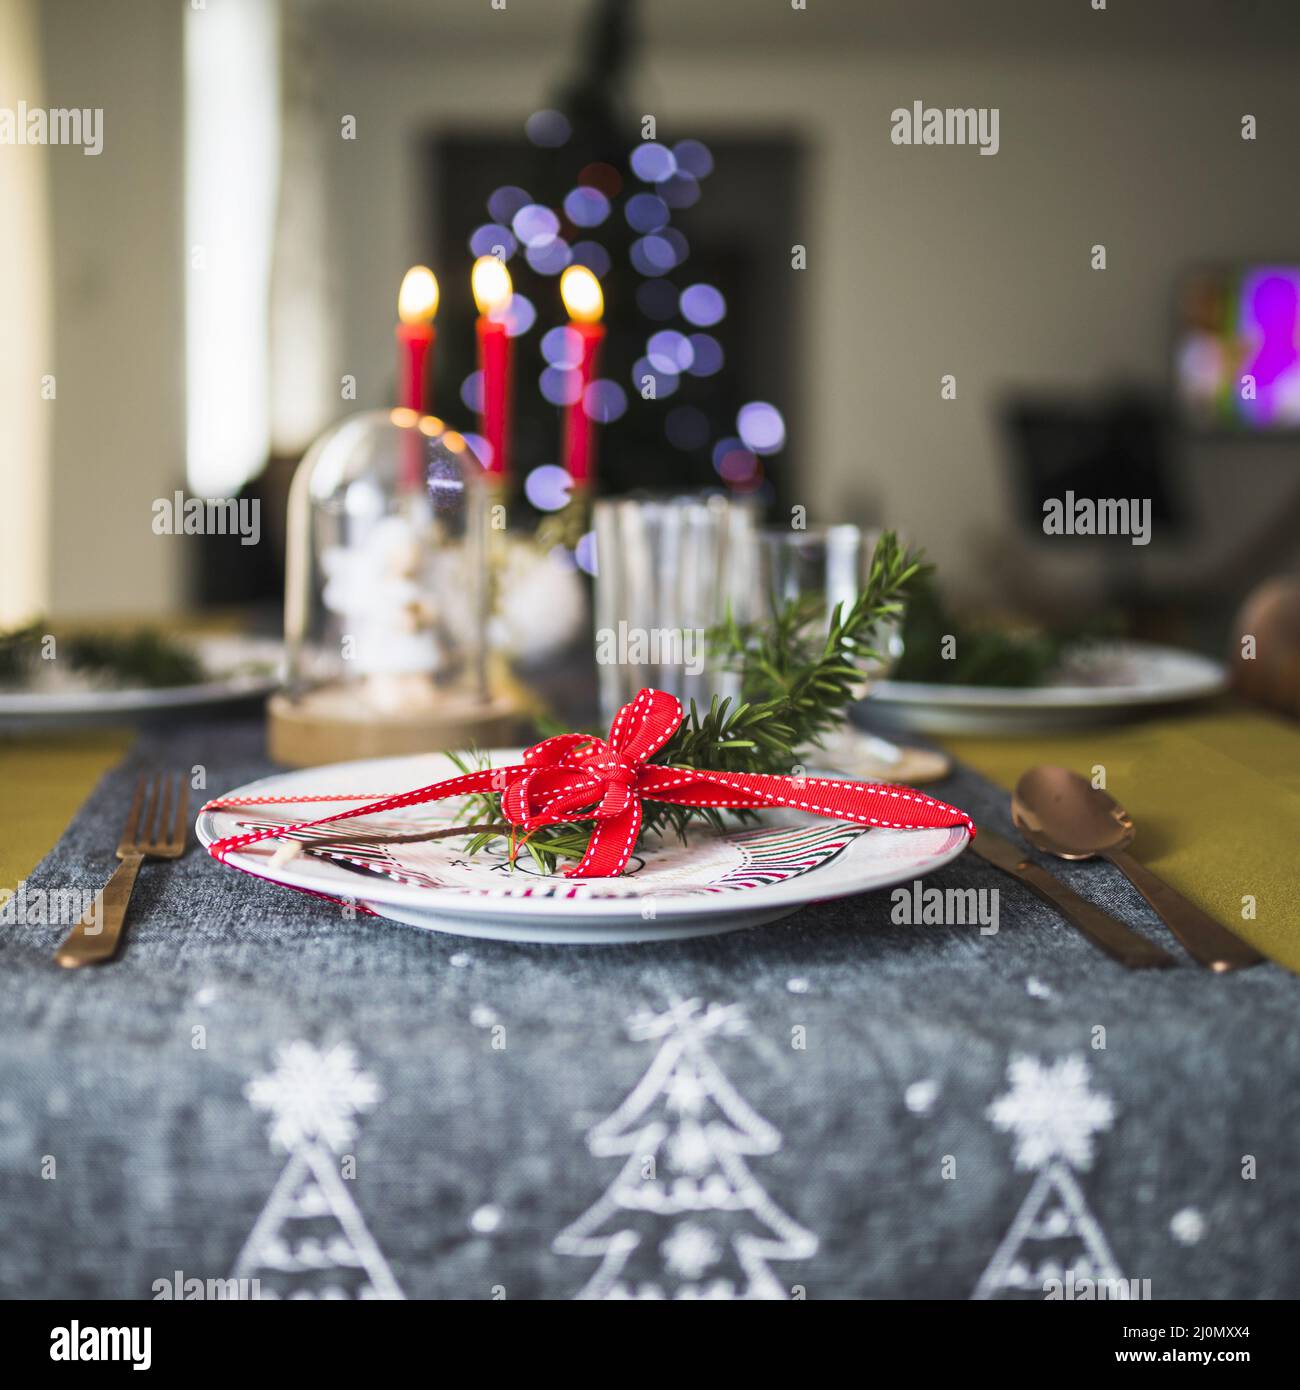 Decorated plate christmas tablecloth Stock Photo